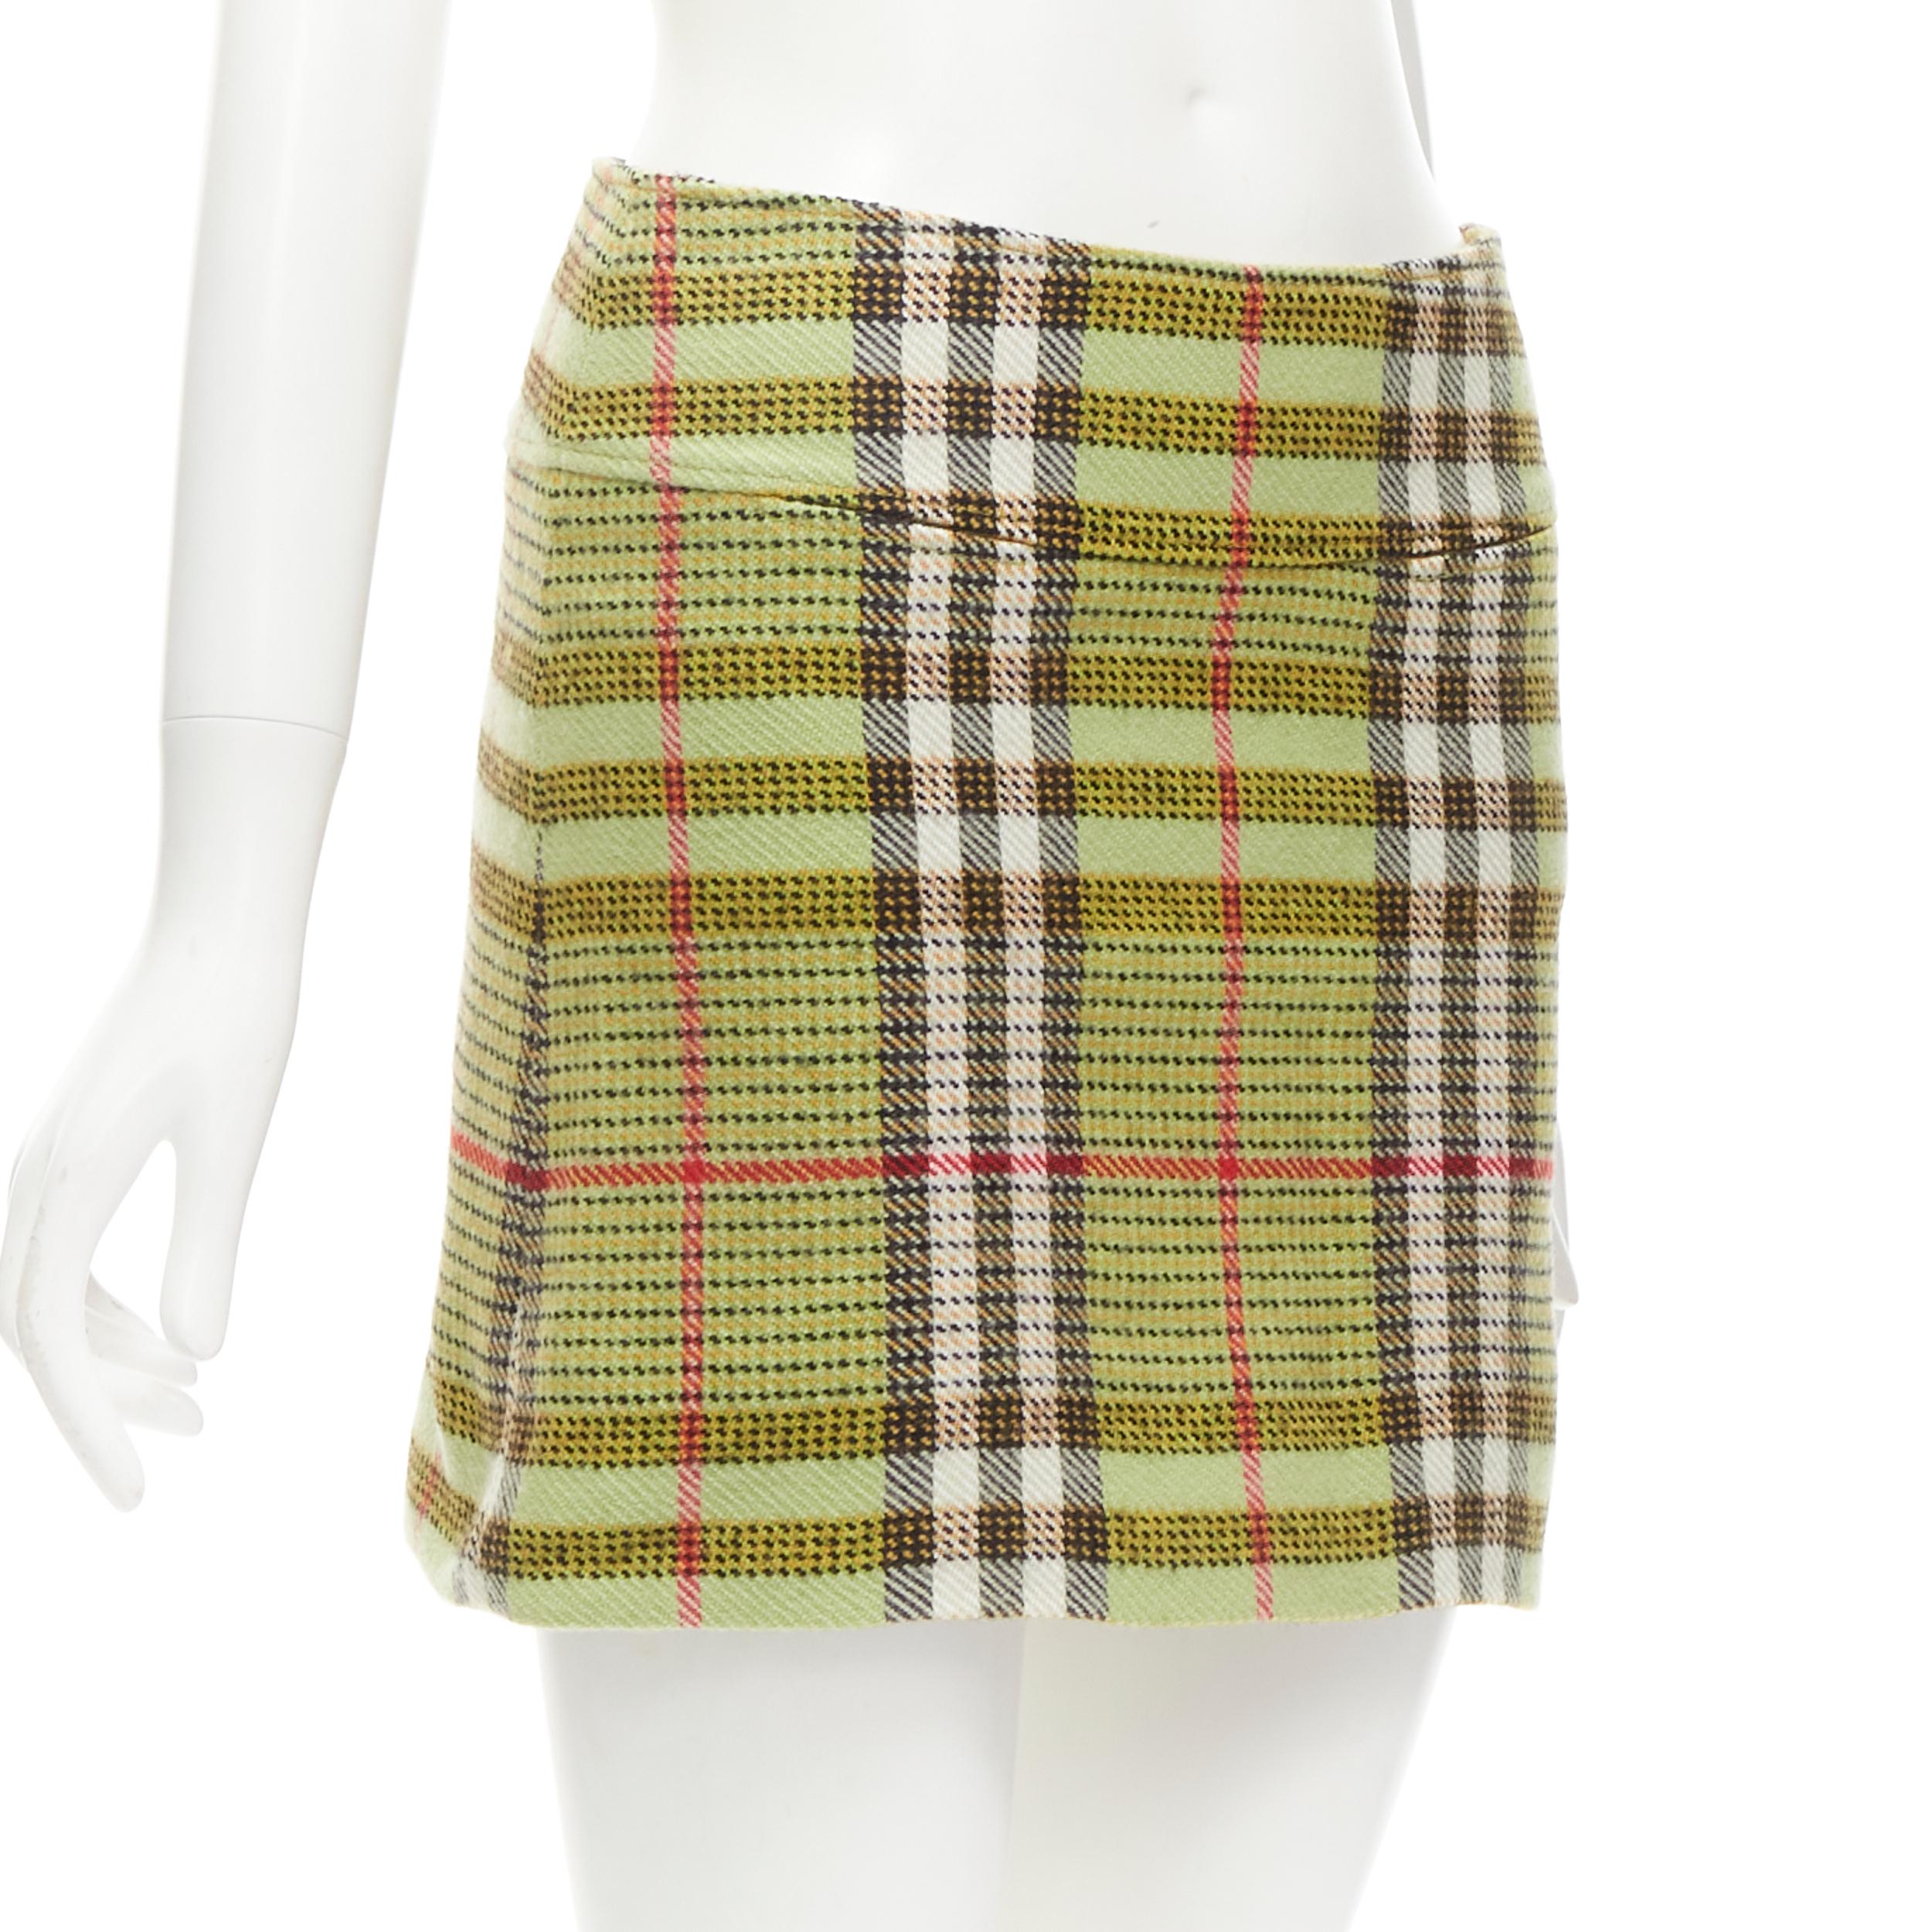 BURBERRY LONDON House Check green wool mini skirt UK6 US4 XS
Brand: Burberry

CONDITION:
Condition: Excellent, this item was pre-owned and is in excellent condition. Composition label removed.

SIZING:
Designer Size: UK 6 / US4

MEASUREMENTS:
Waist: